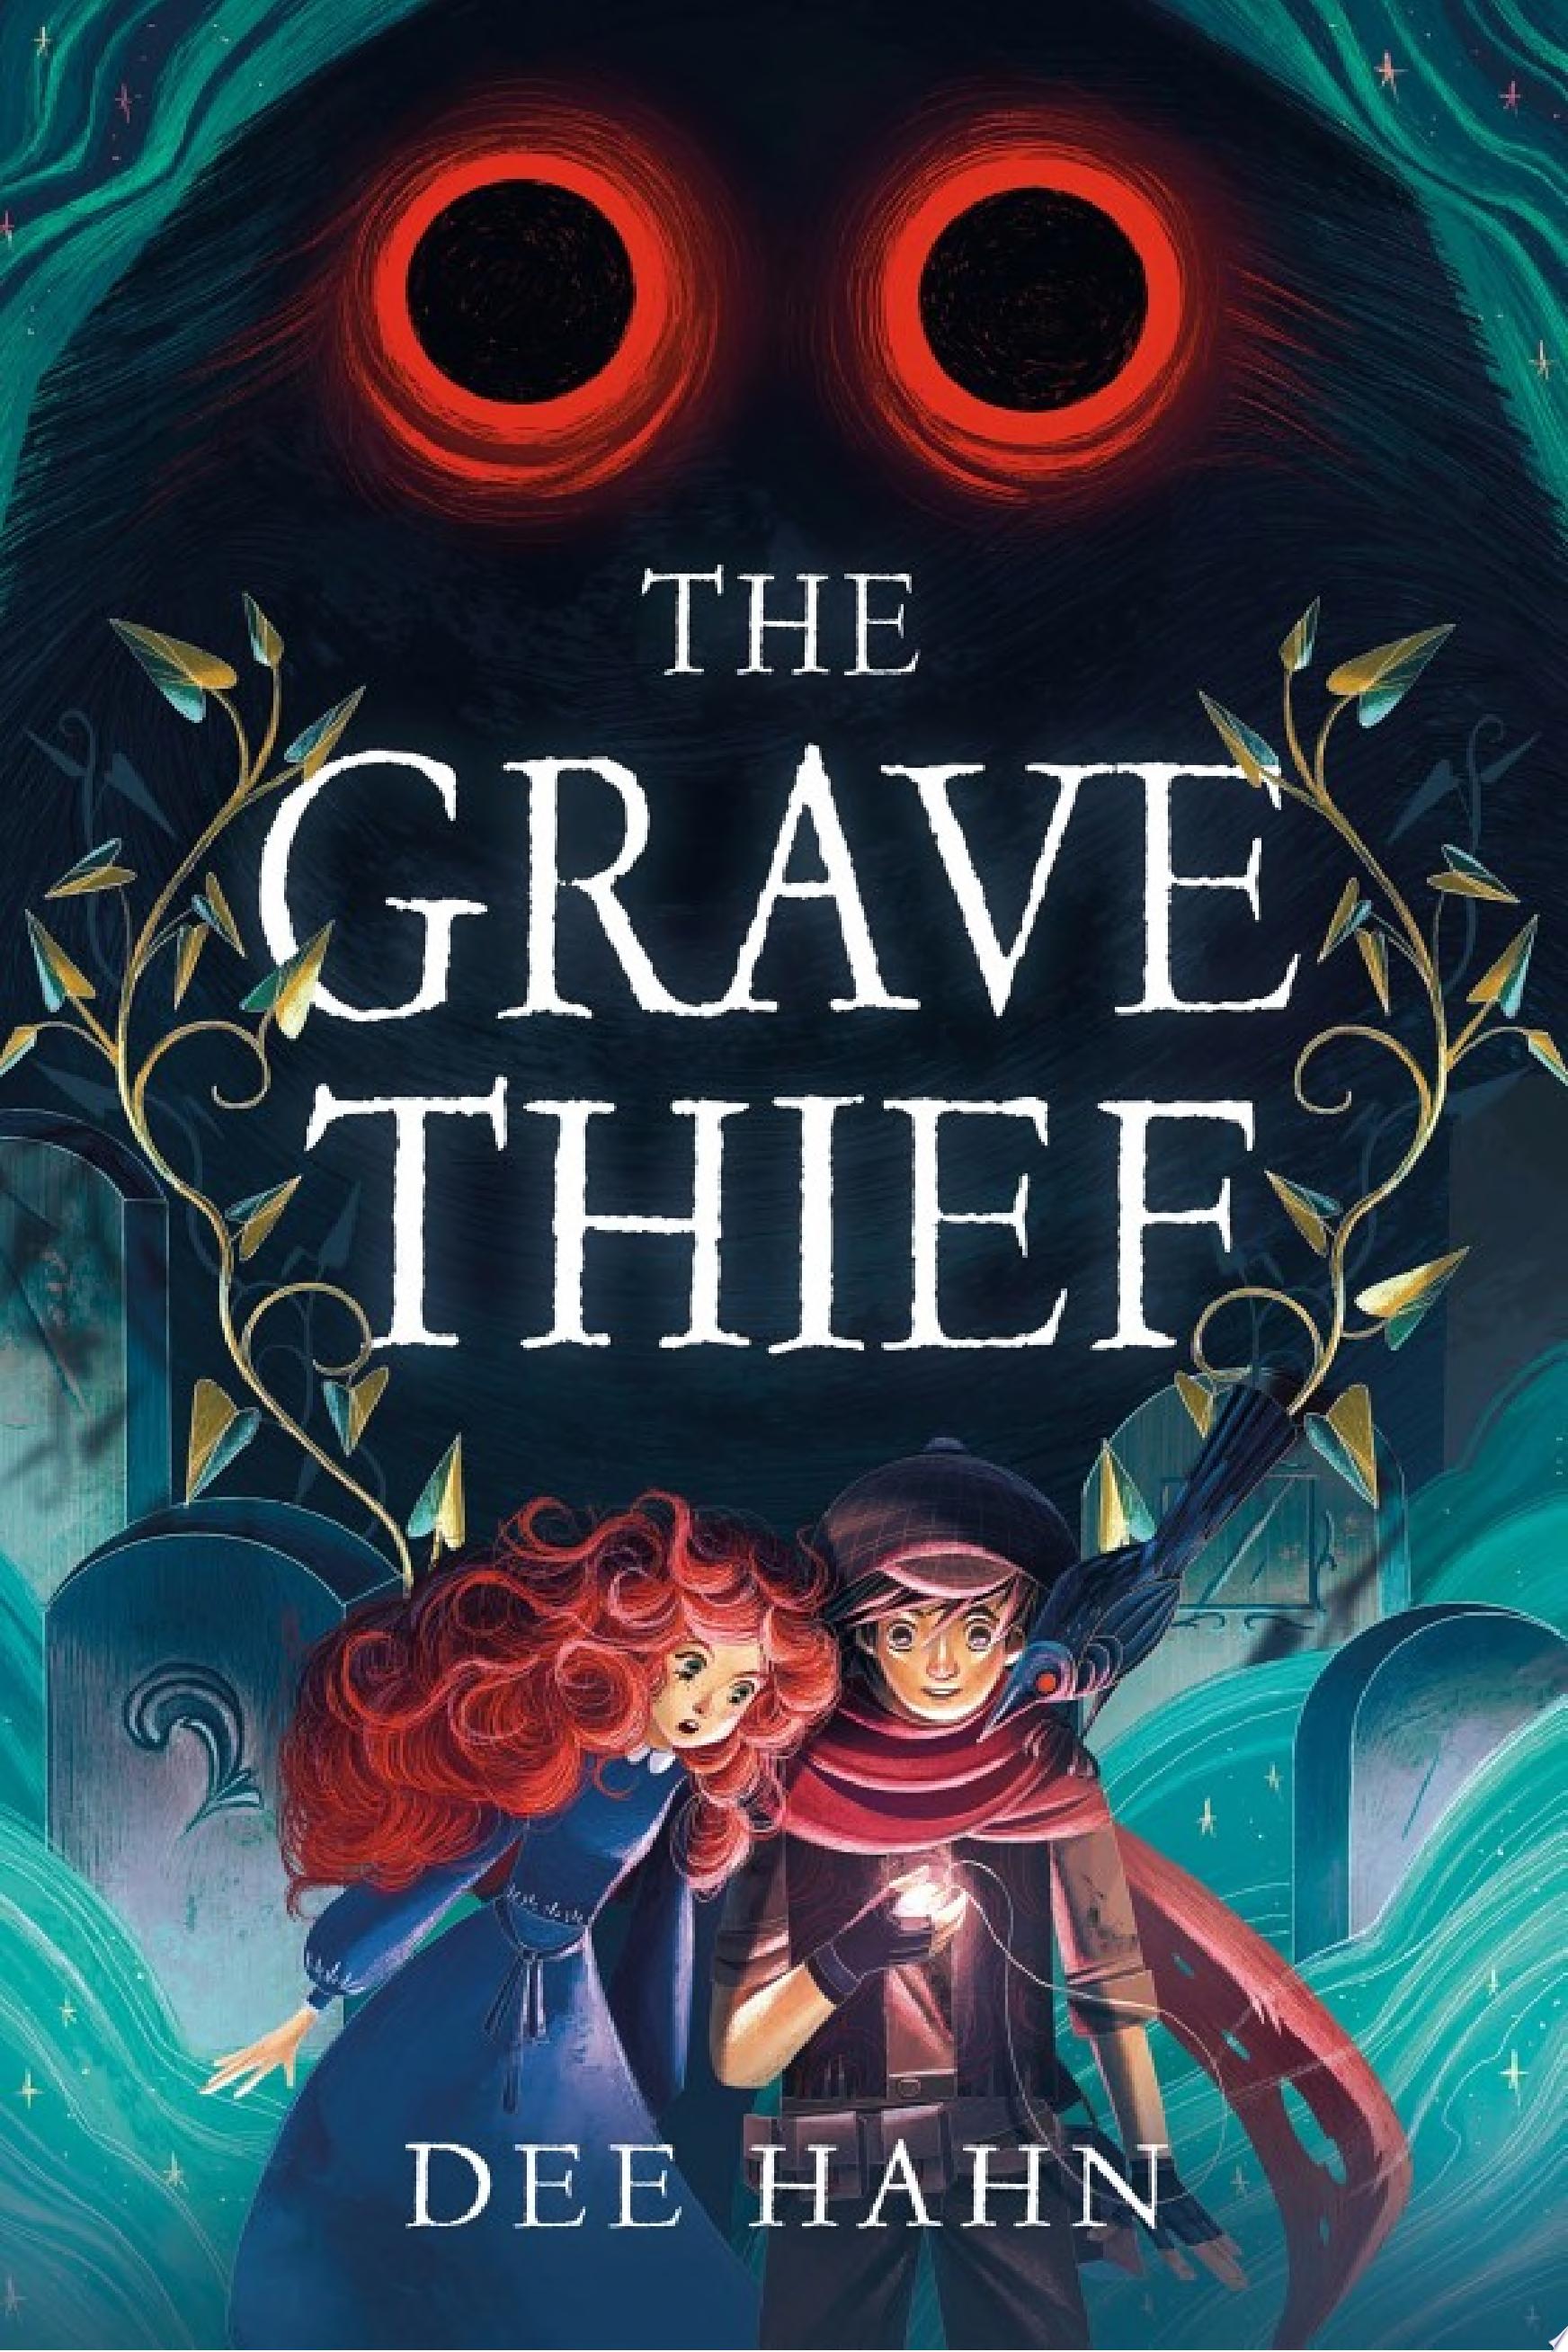 Image for "The Grave Thief"